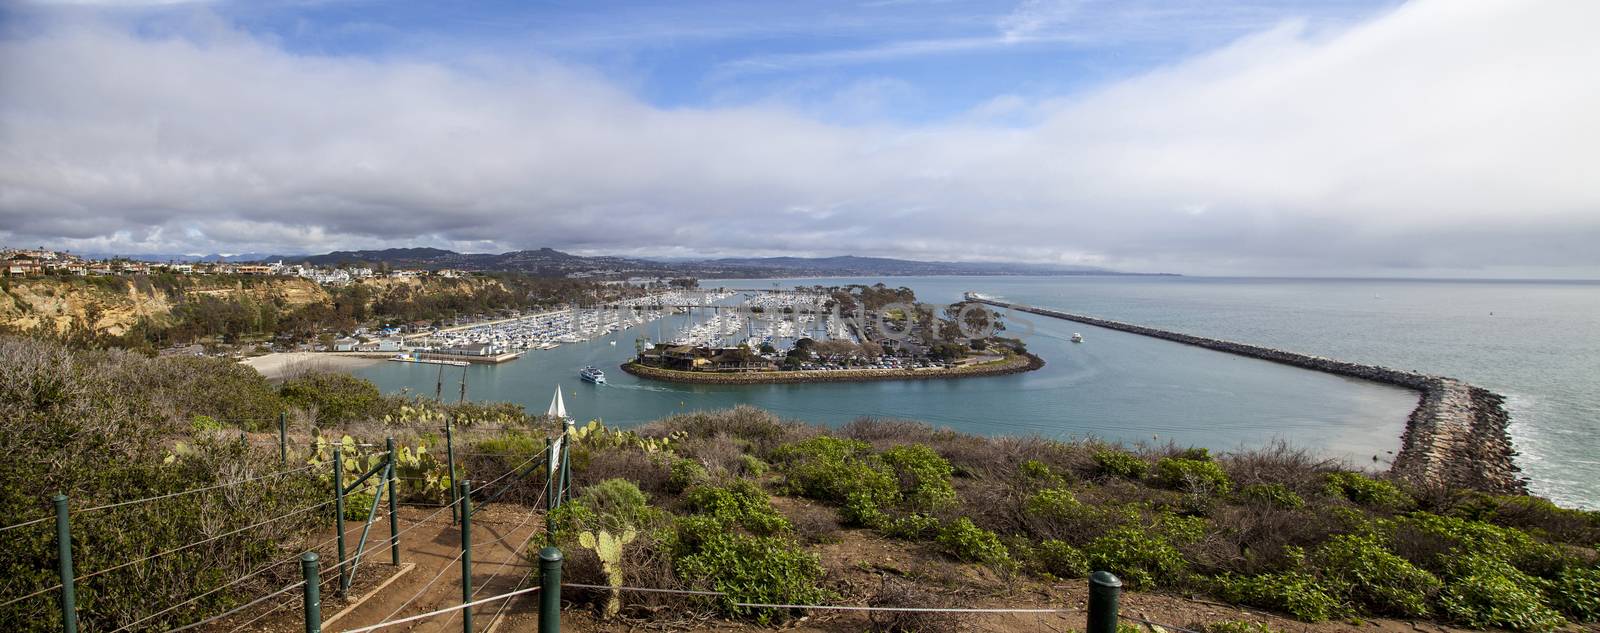 Dana Point Harbor from the hiking path by steffstarr